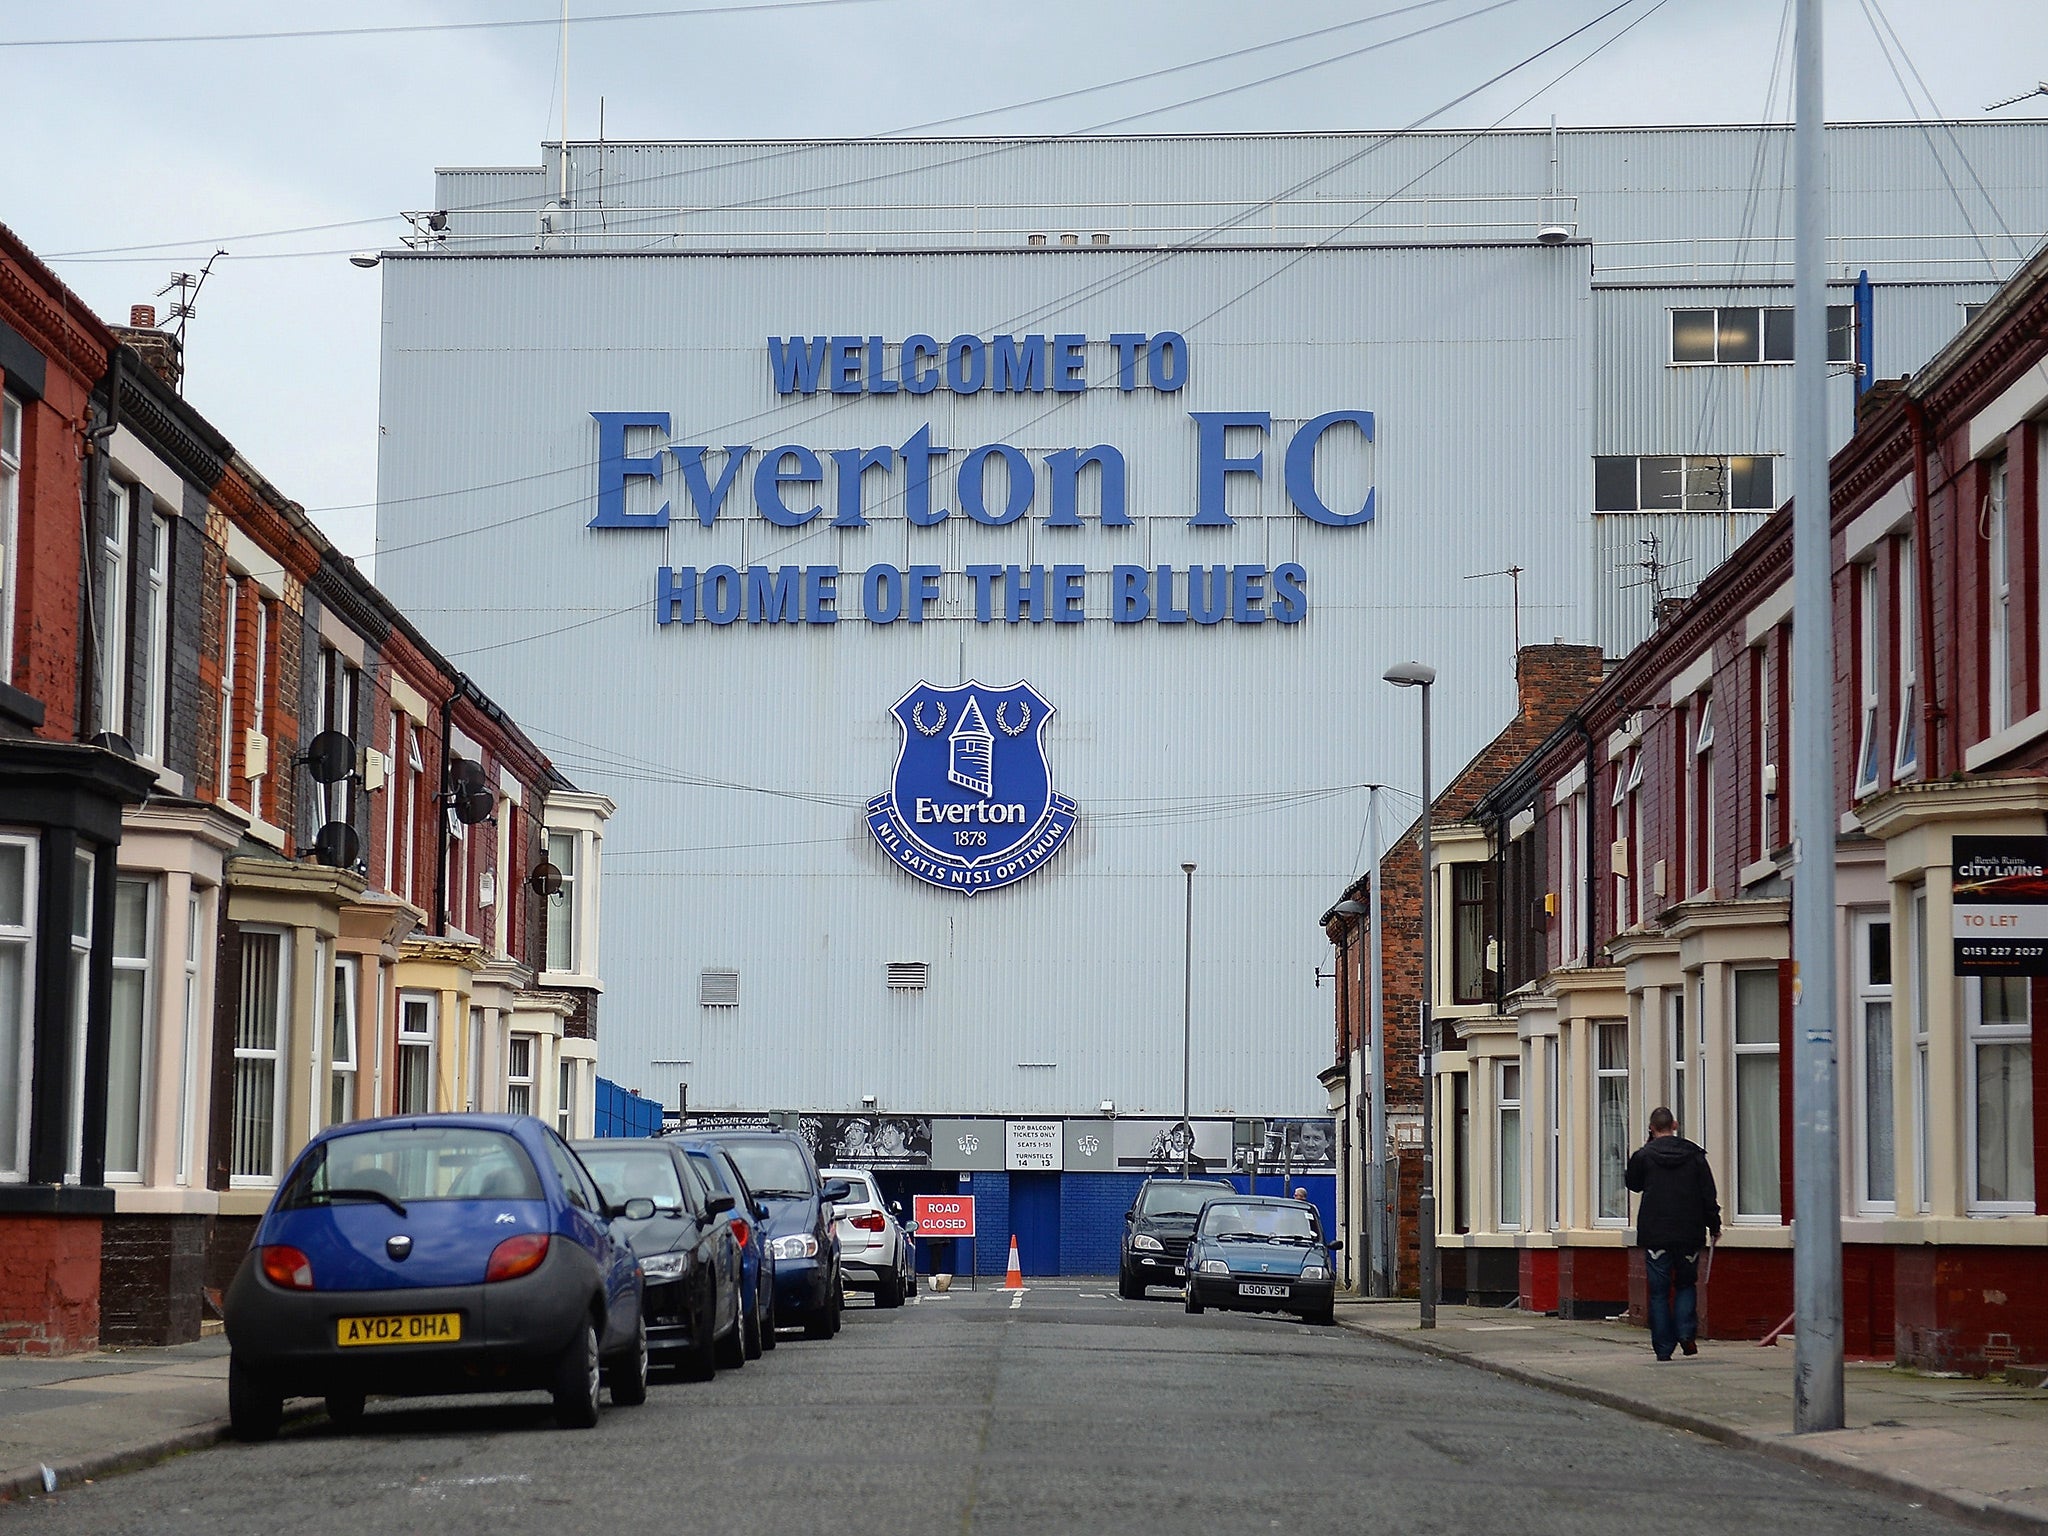 Everton have plans to start building a replacement for Goodison Park from 2017